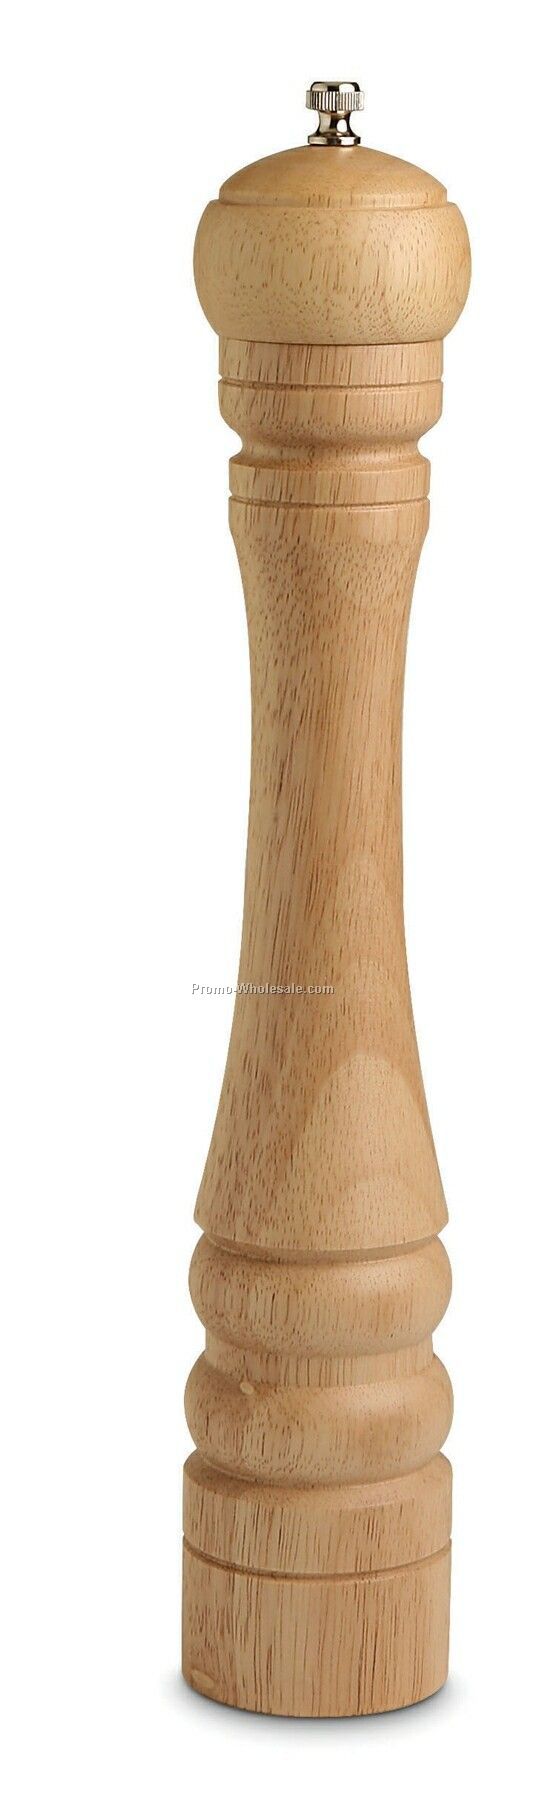 Natural Wood Pepper Mill - Large